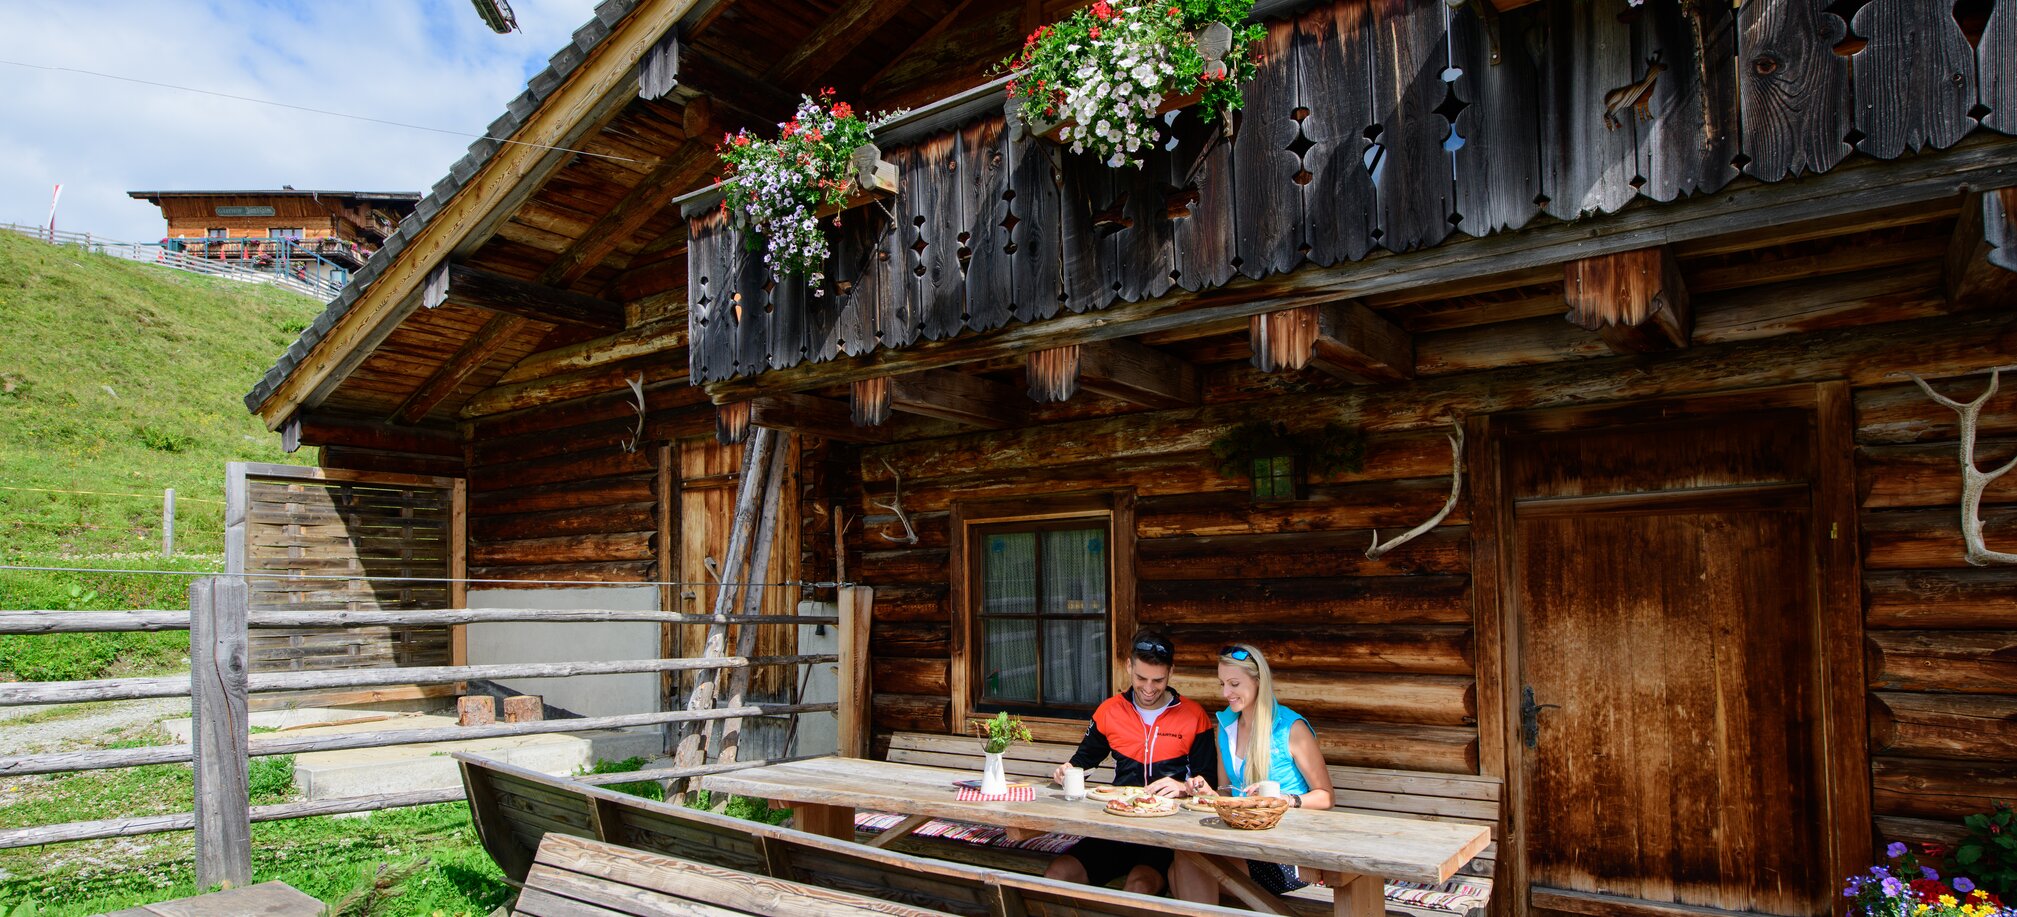 Culinary enjoyment in summer with regional specialties on the mountain huts in Ski amadé